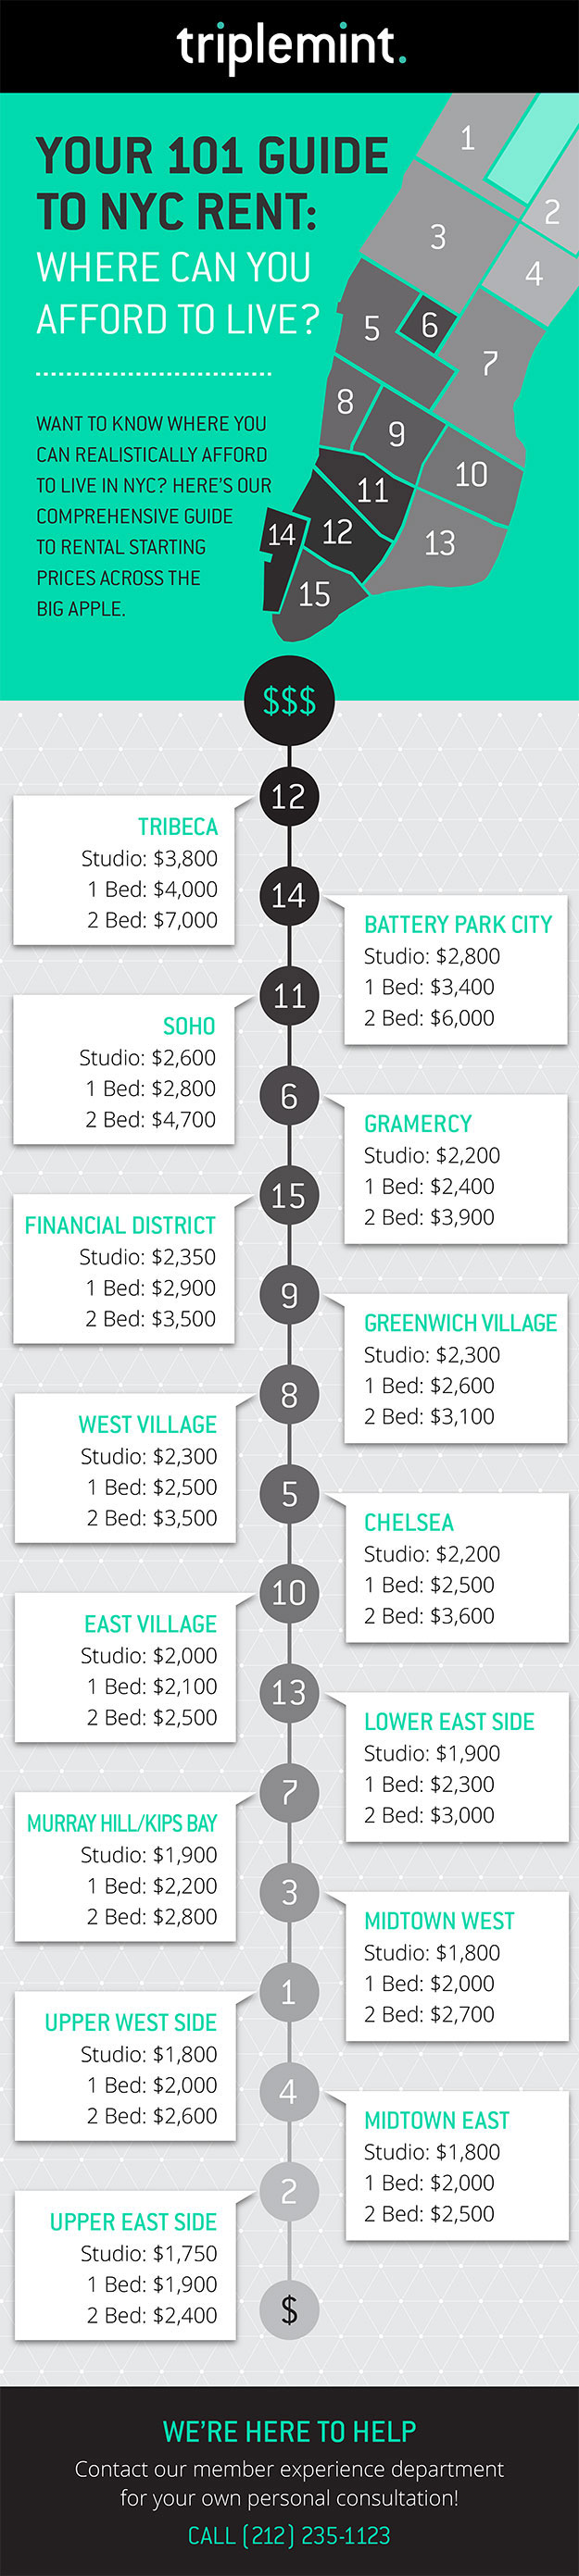 Where-Can-You-Afford-infographic